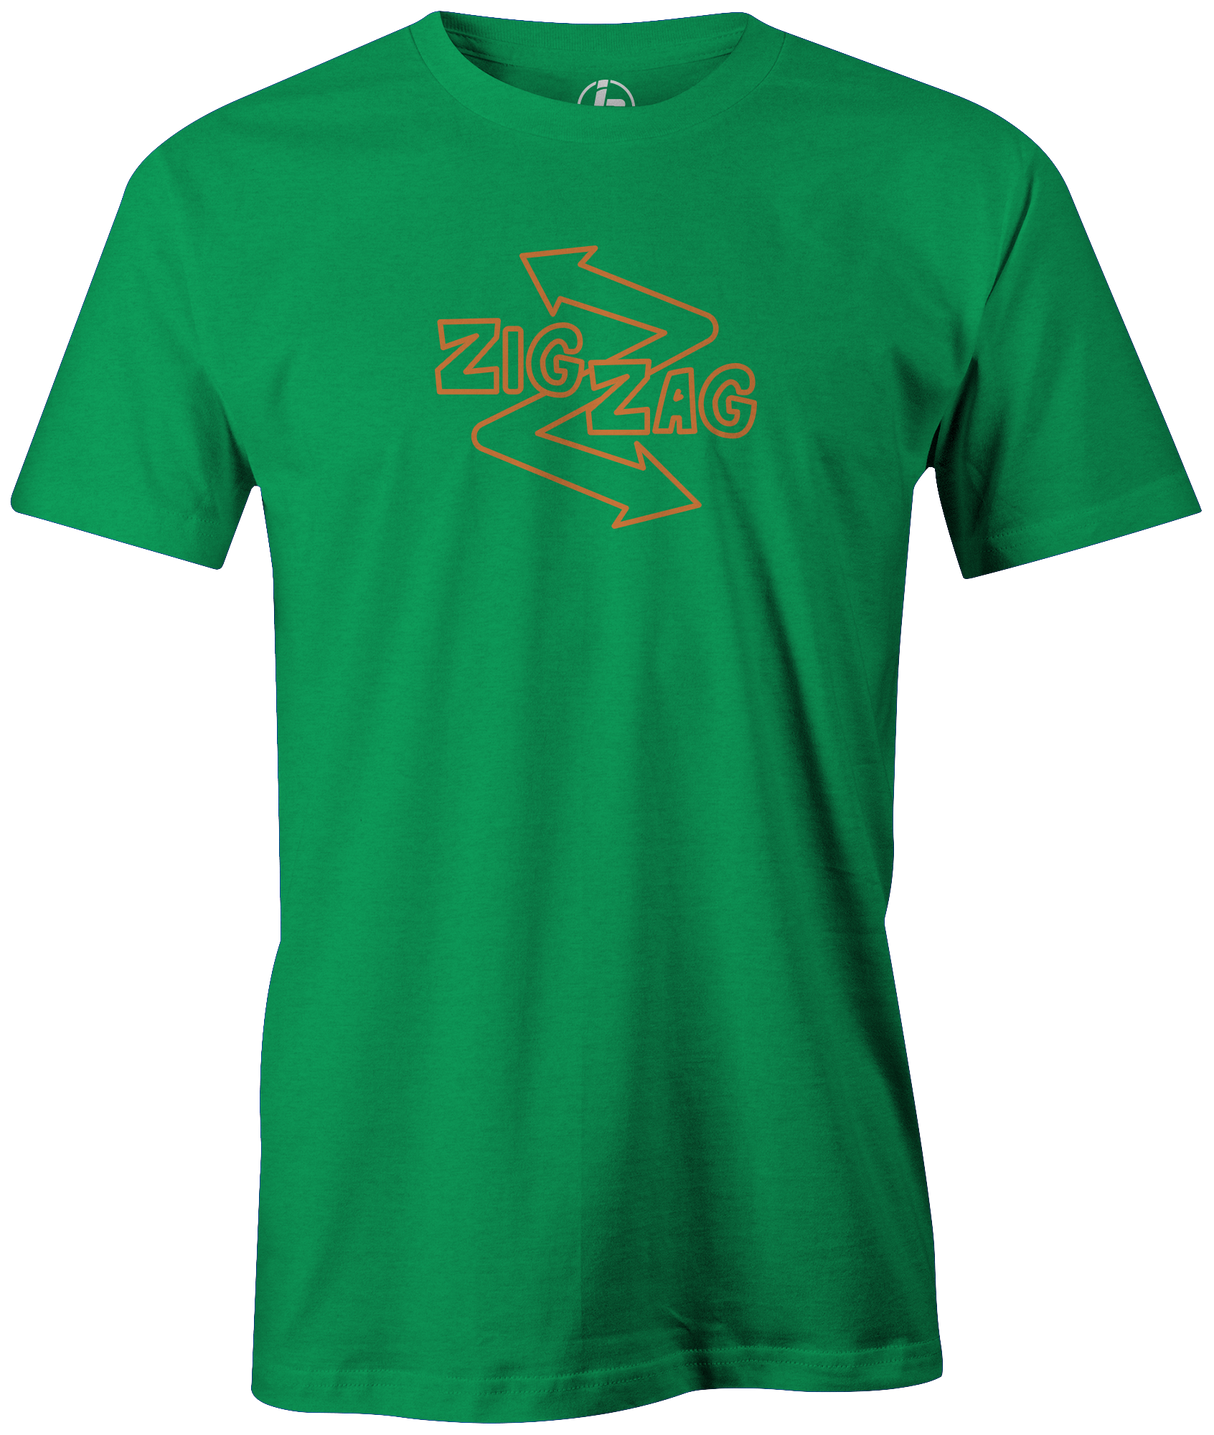 Radical Zig Zag Check out this Radical Technologies "R" logo bowling league tee (t-shirt, tees, tshirt, teeshirt) available at Inside Bowling. Comfortable cheap discounted special bowling shirts for bowlers online. Get what you can't get on Amazon, Walmart, Target, or E-Bay here.